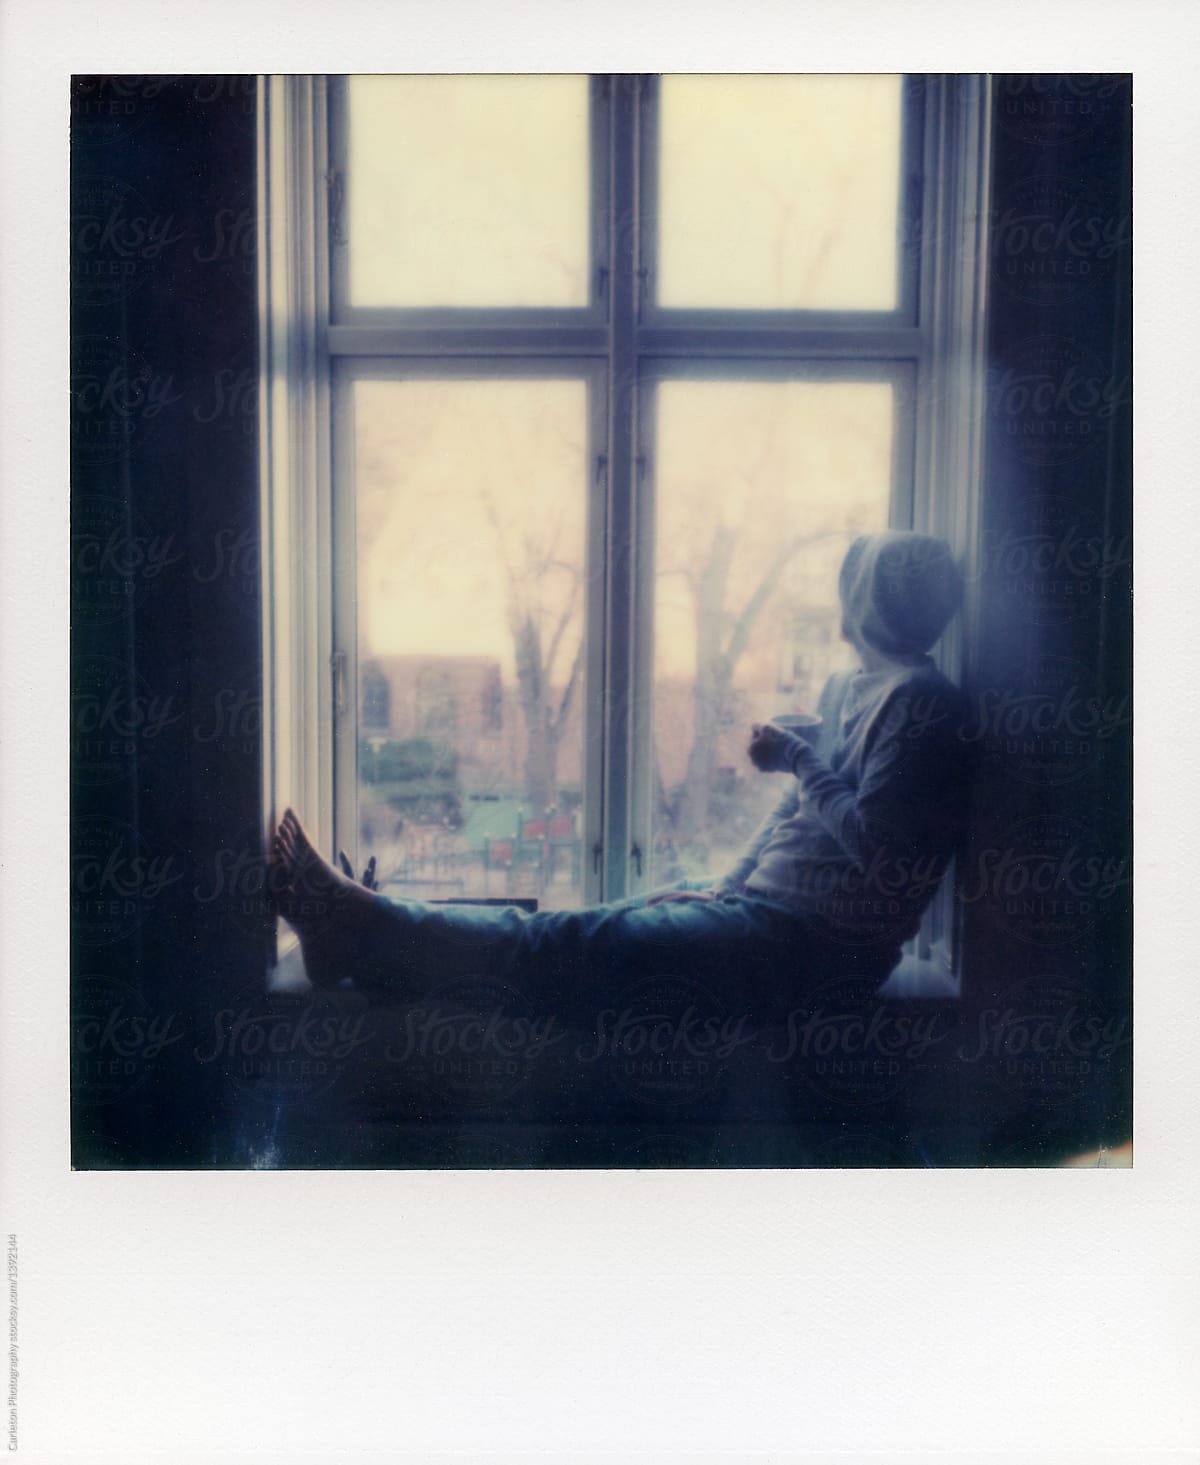 Woman relaxing with coffee on a windowsill